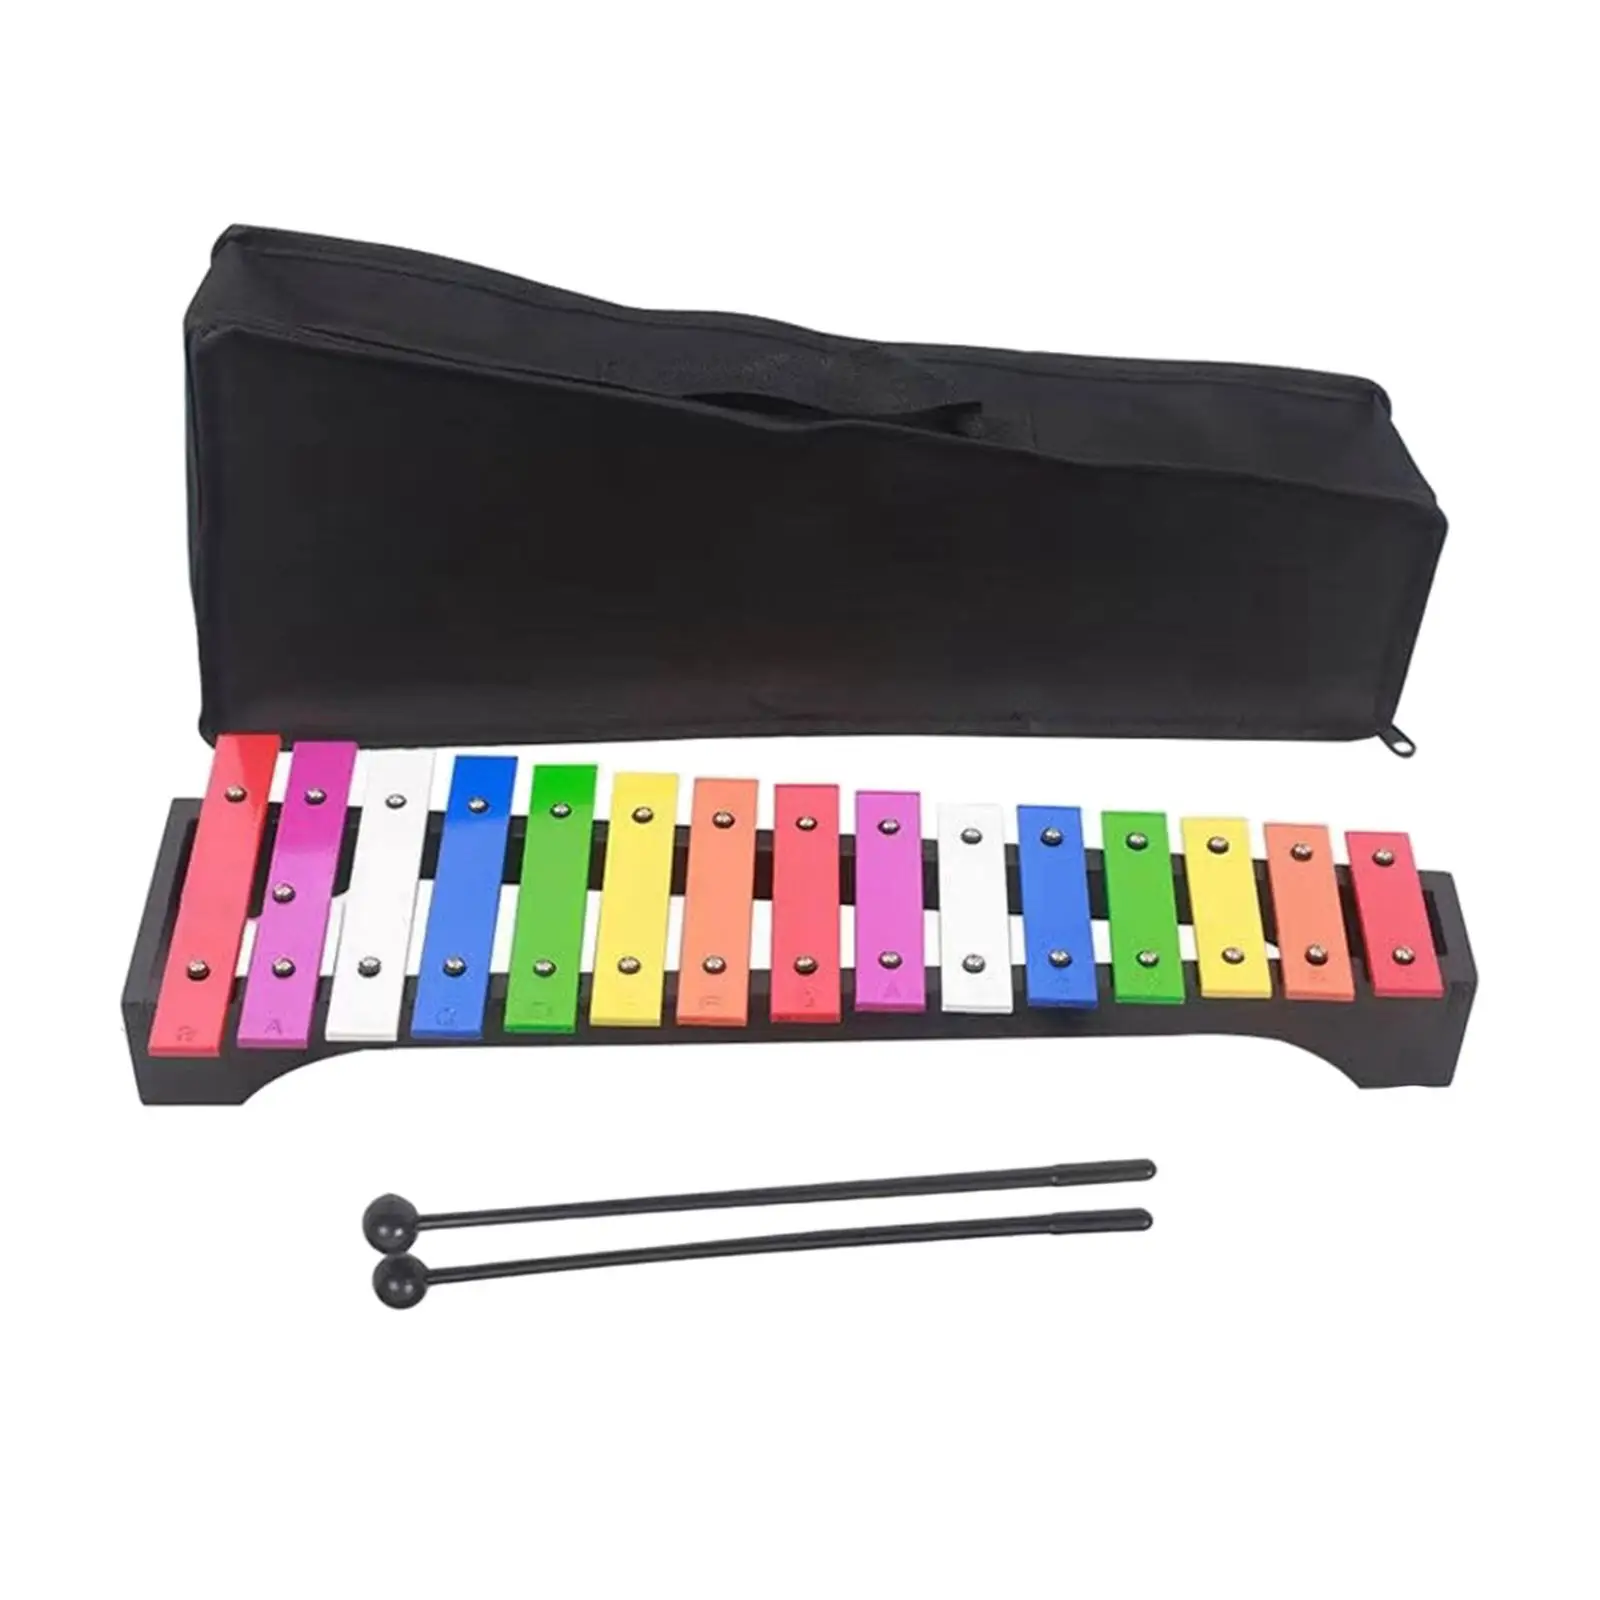 15 Note Glockenspiel Enlightenment Hand Percussion Montessori for Live Performance Concert Music Lessons Home School Orchestras